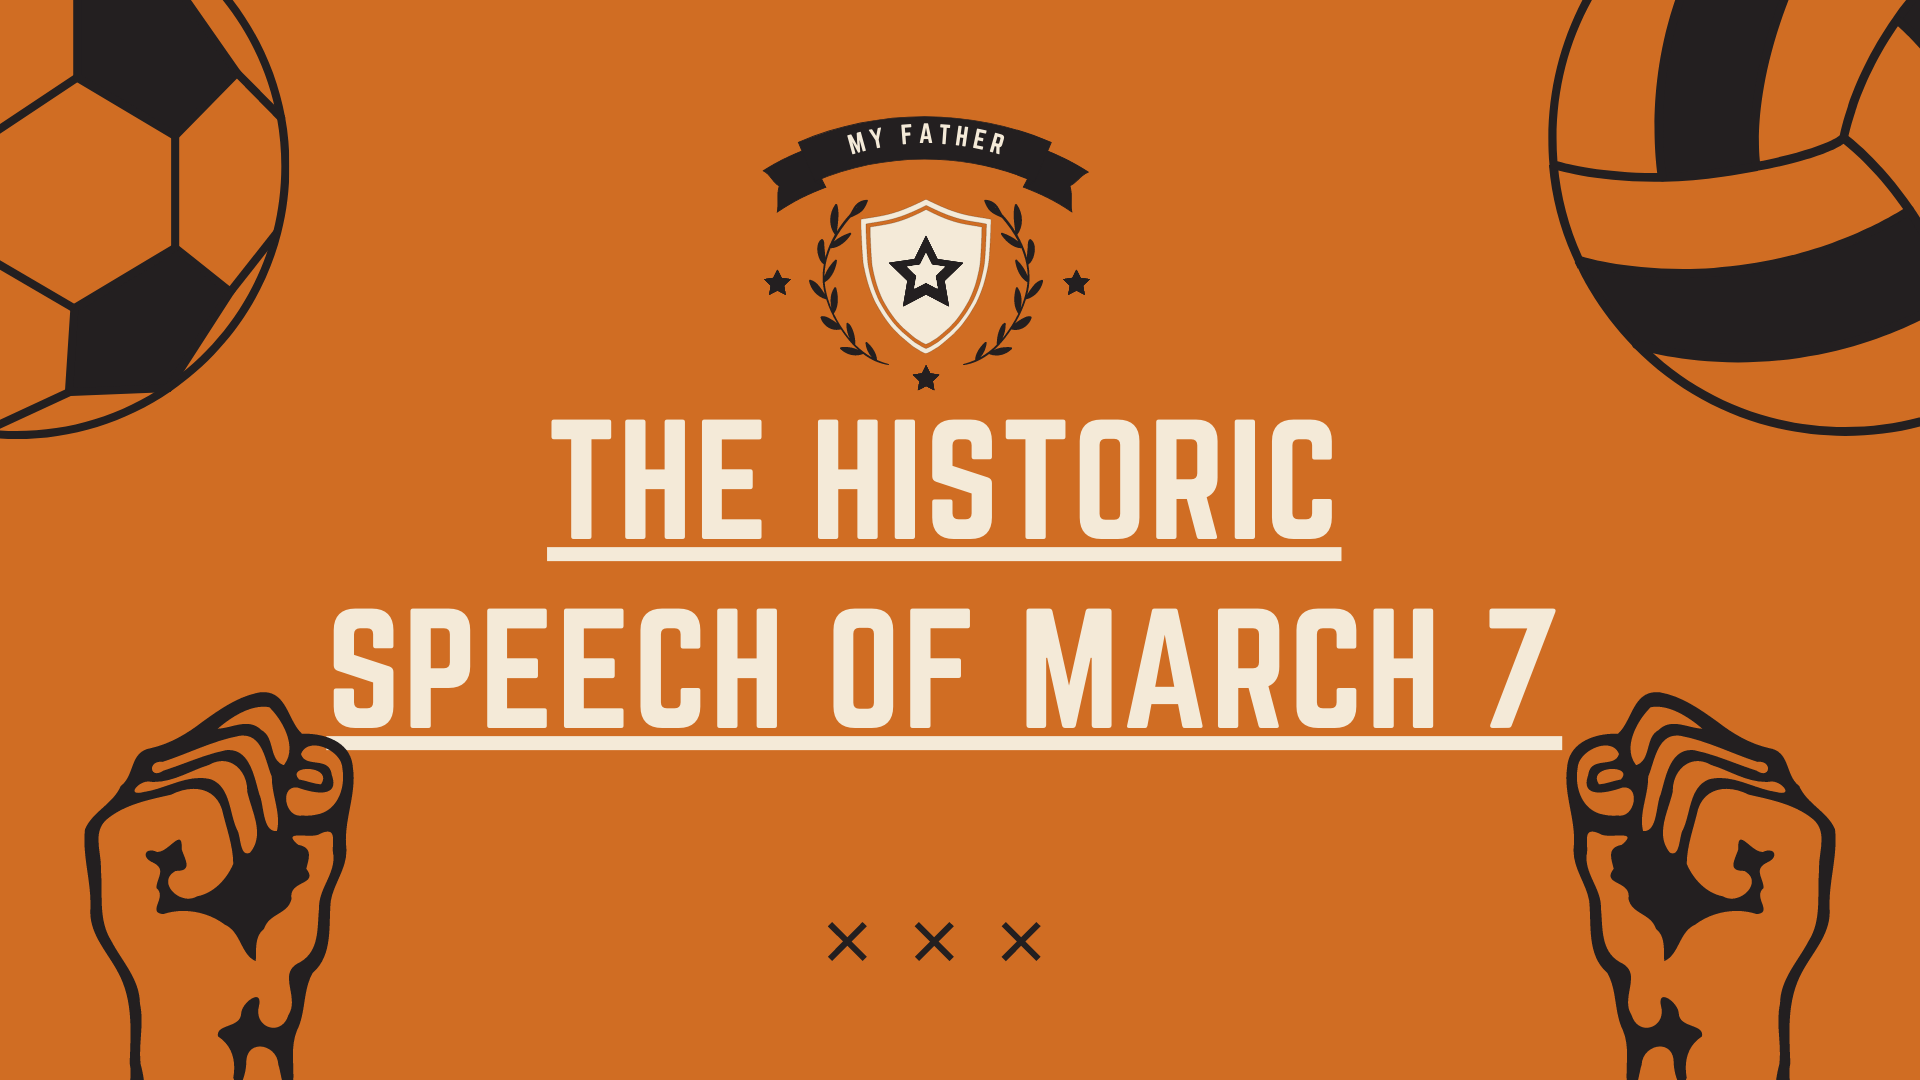 The historic speech of March 7